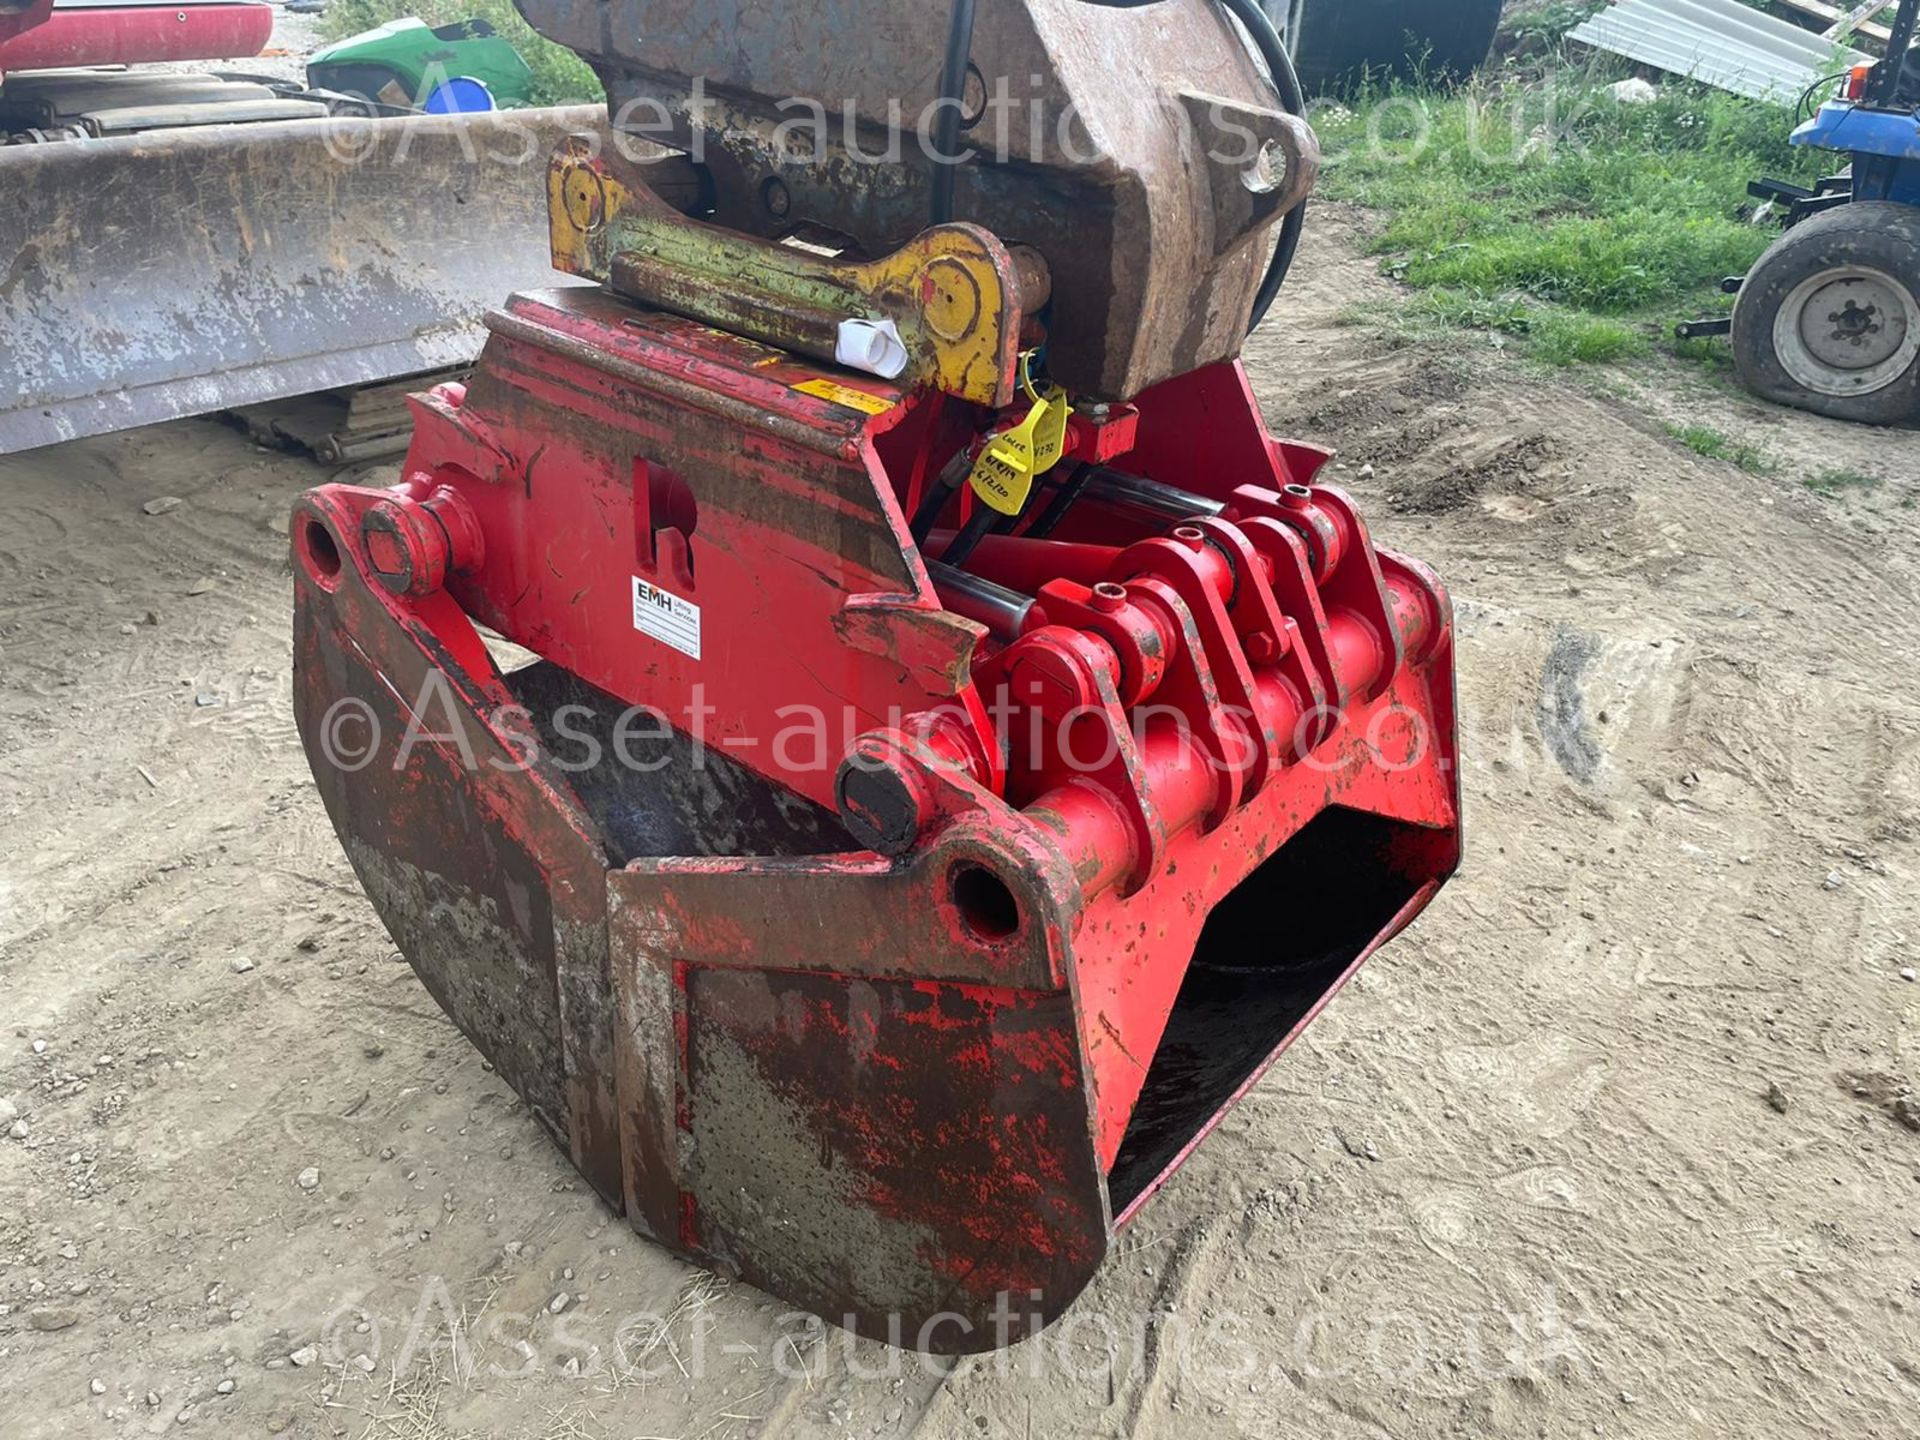 HYDRAULIC RED SHELL GRAB, SUITABLE FOR A LARGE EXCAVATOR, HYDRAULIC DRIVEN, 65mm PINS *PLUS VAT*